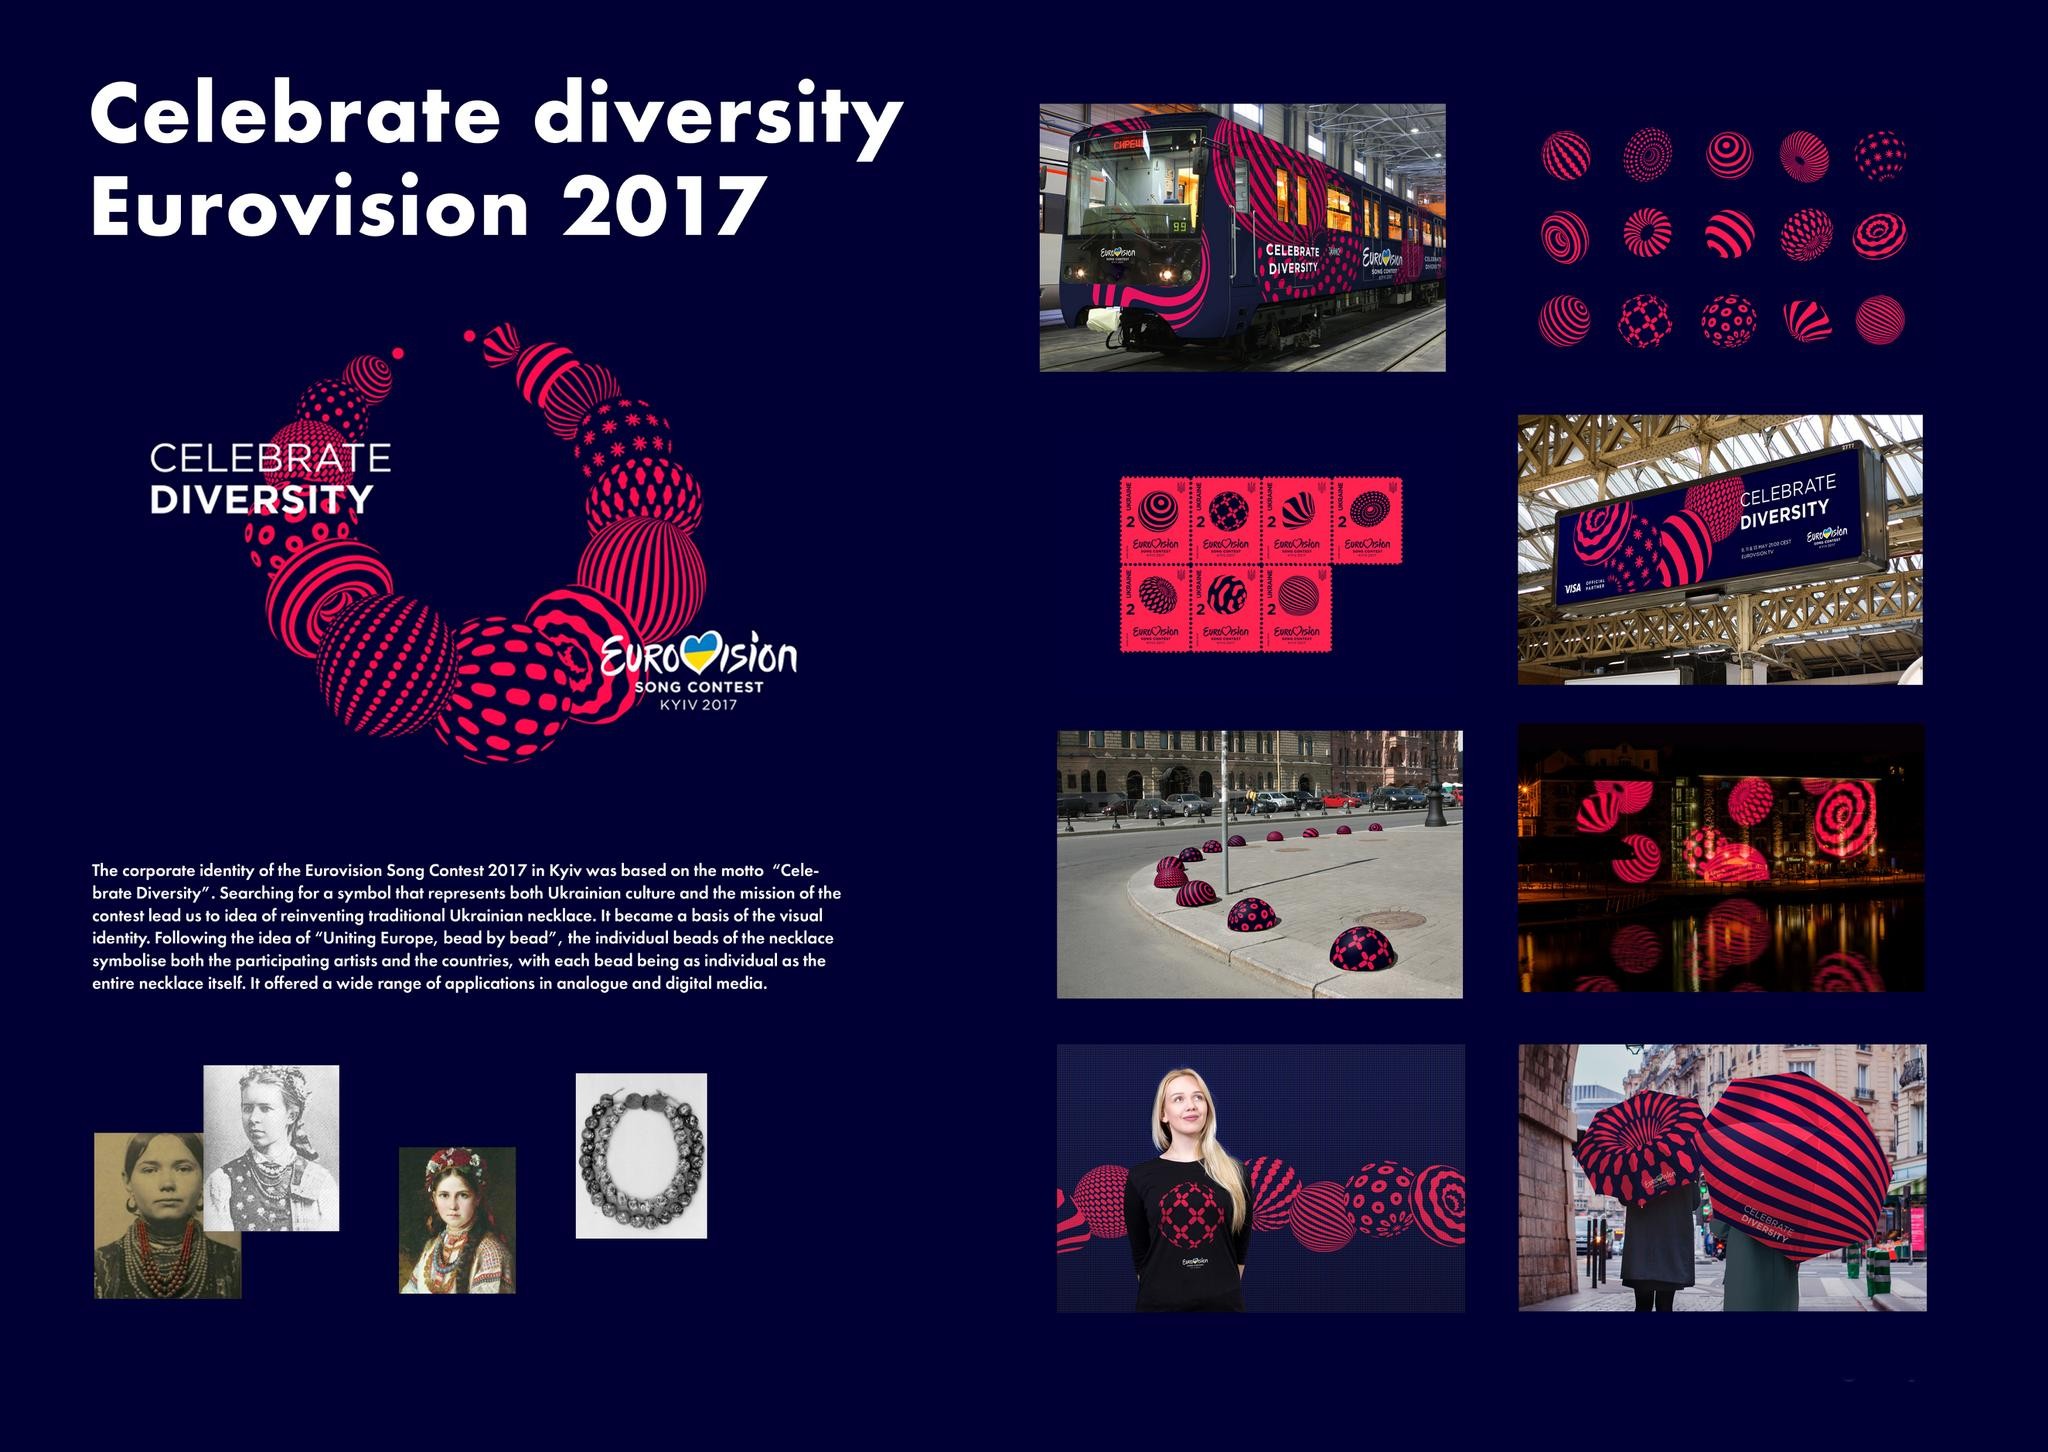 "CELEBRATE DIVERSITY" EUROVISION SONG CONTEST